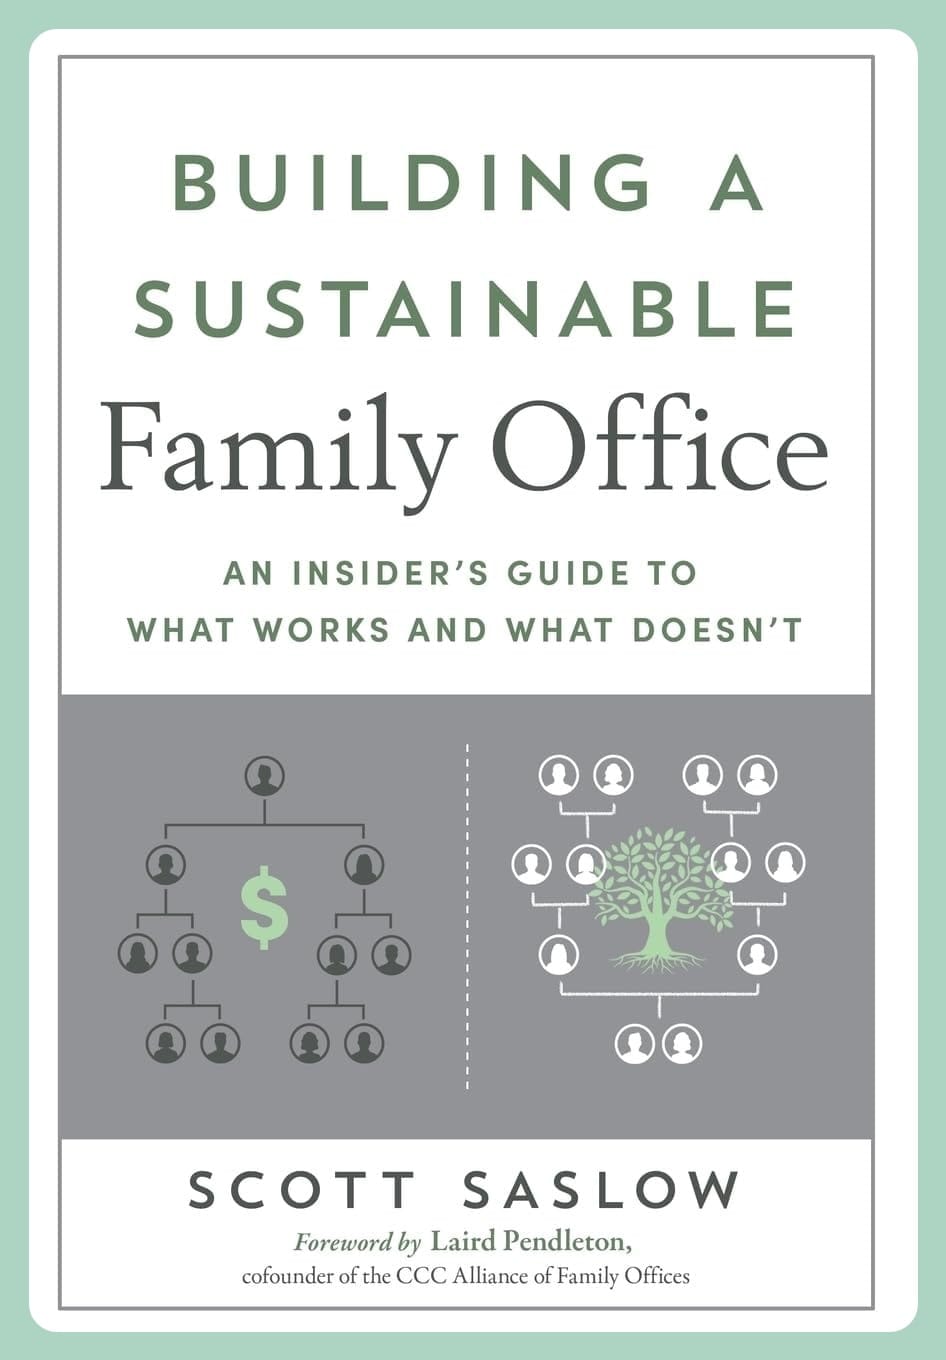 Building a Sustainable Family Office With Scott Saslow, Founder of ONE WORLD Investments